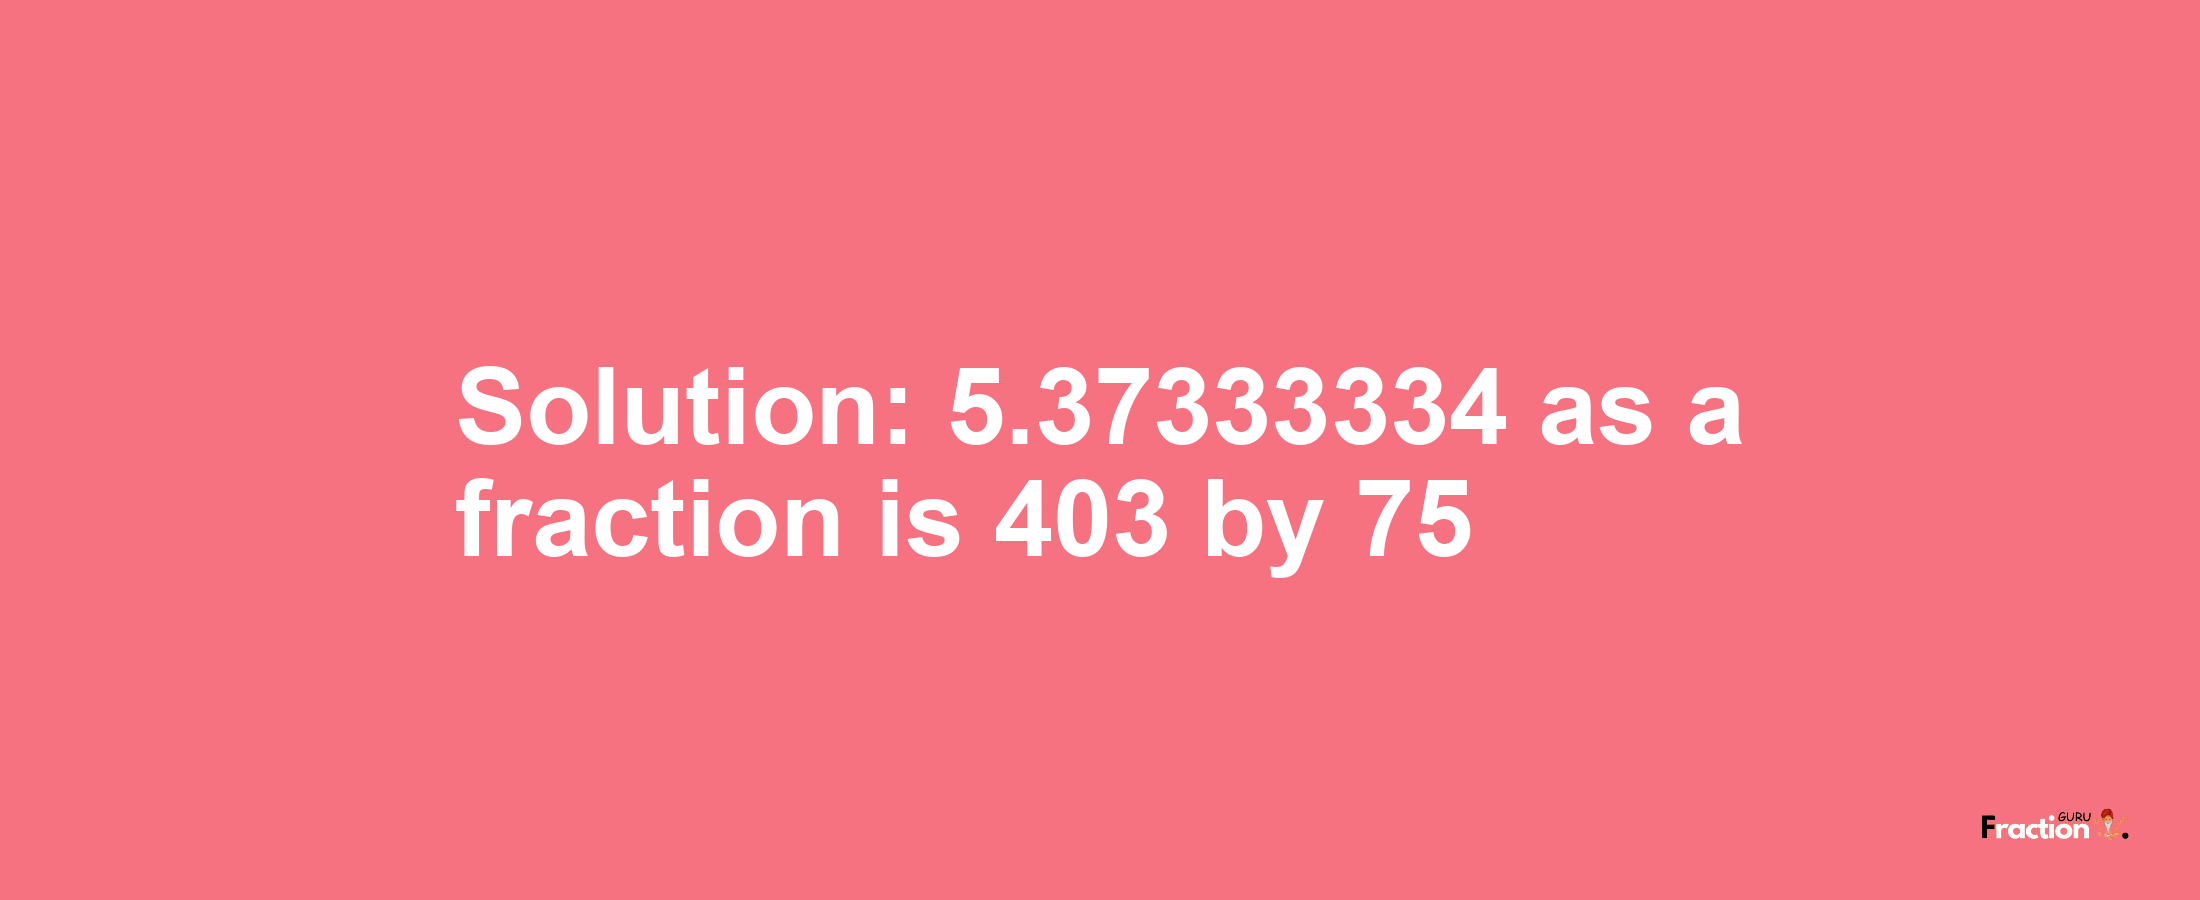 Solution:5.37333334 as a fraction is 403/75